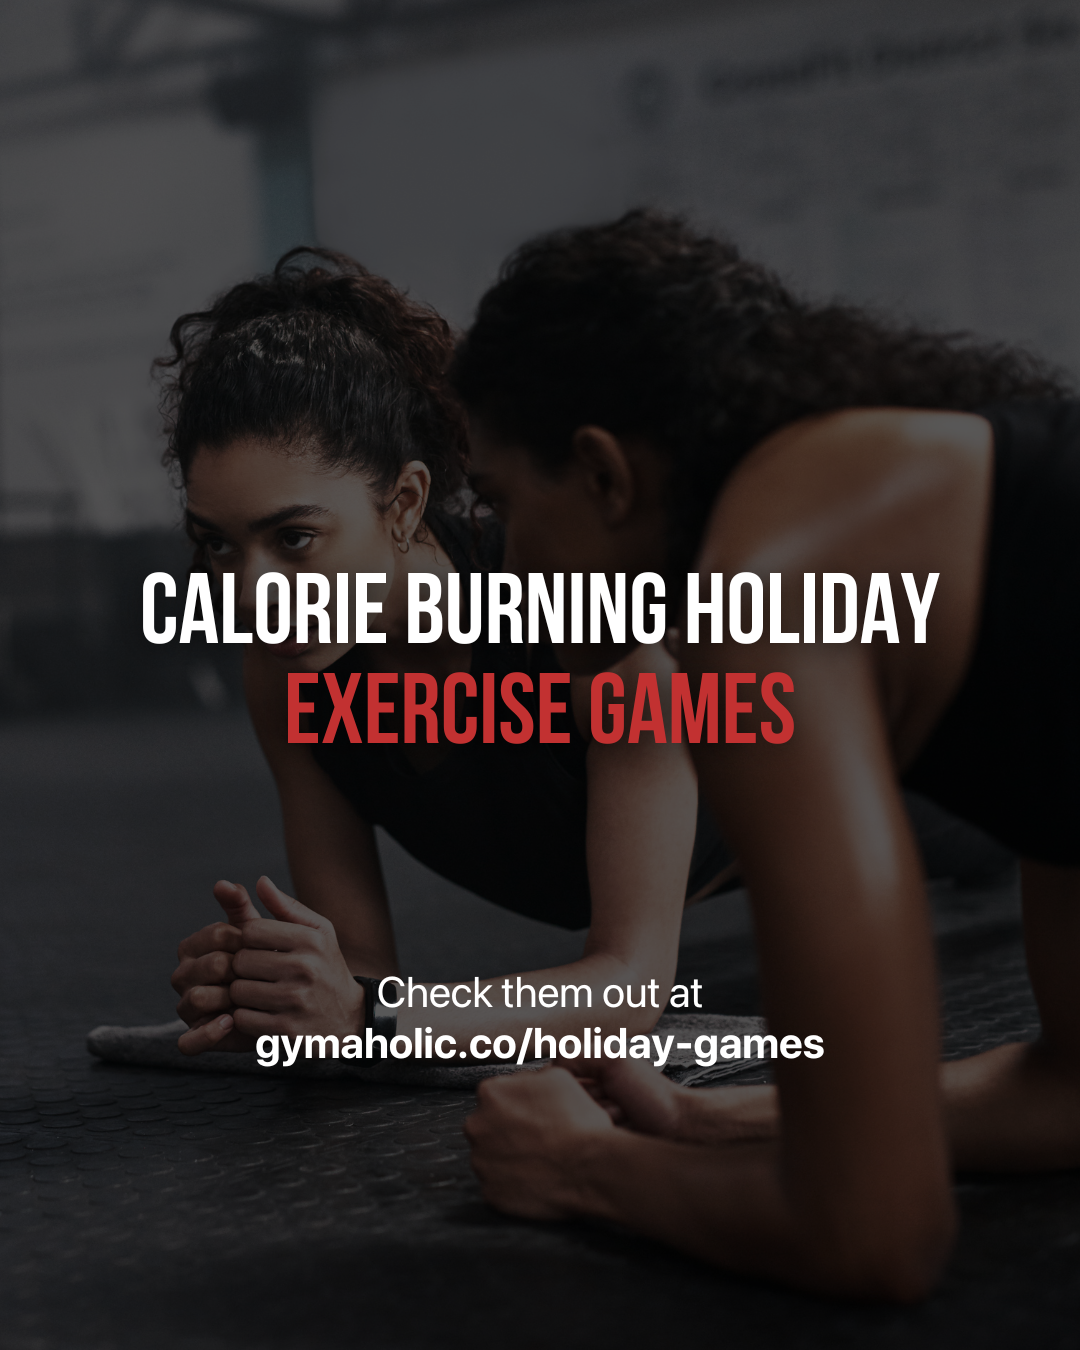 Calorie Burning Holiday Exercise Games